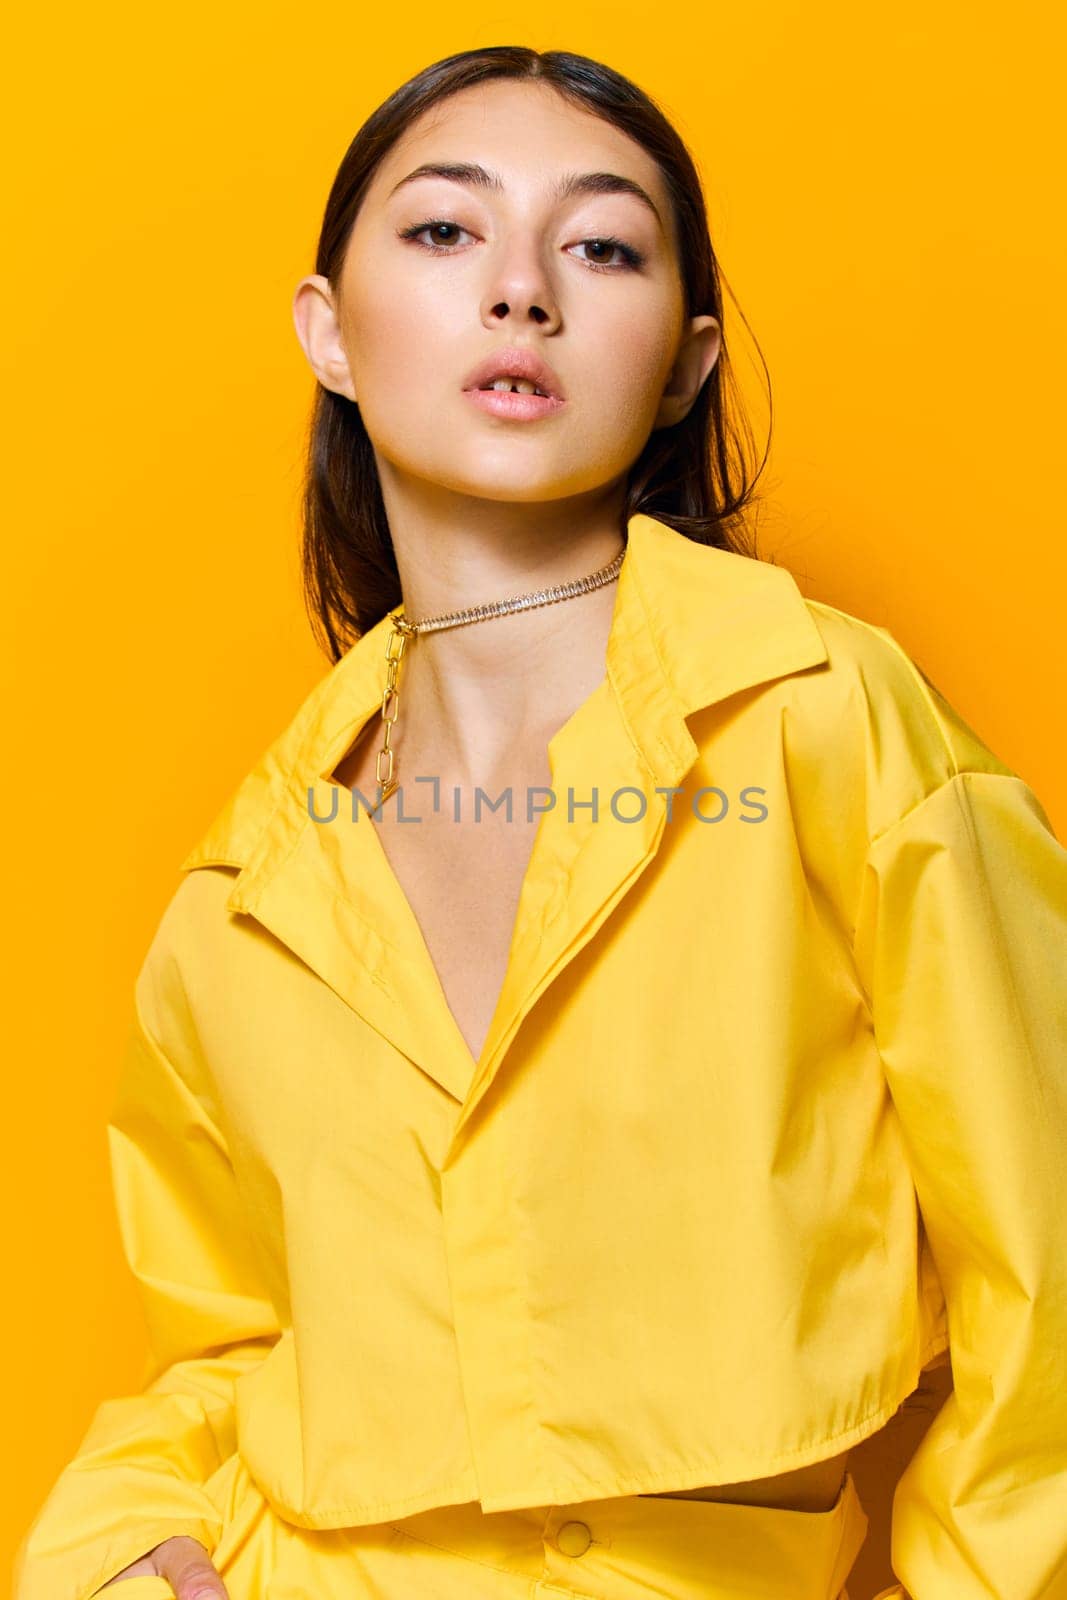 trendy woman lifestyle girl young model fashion attractive yellow beautiful female by SHOTPRIME